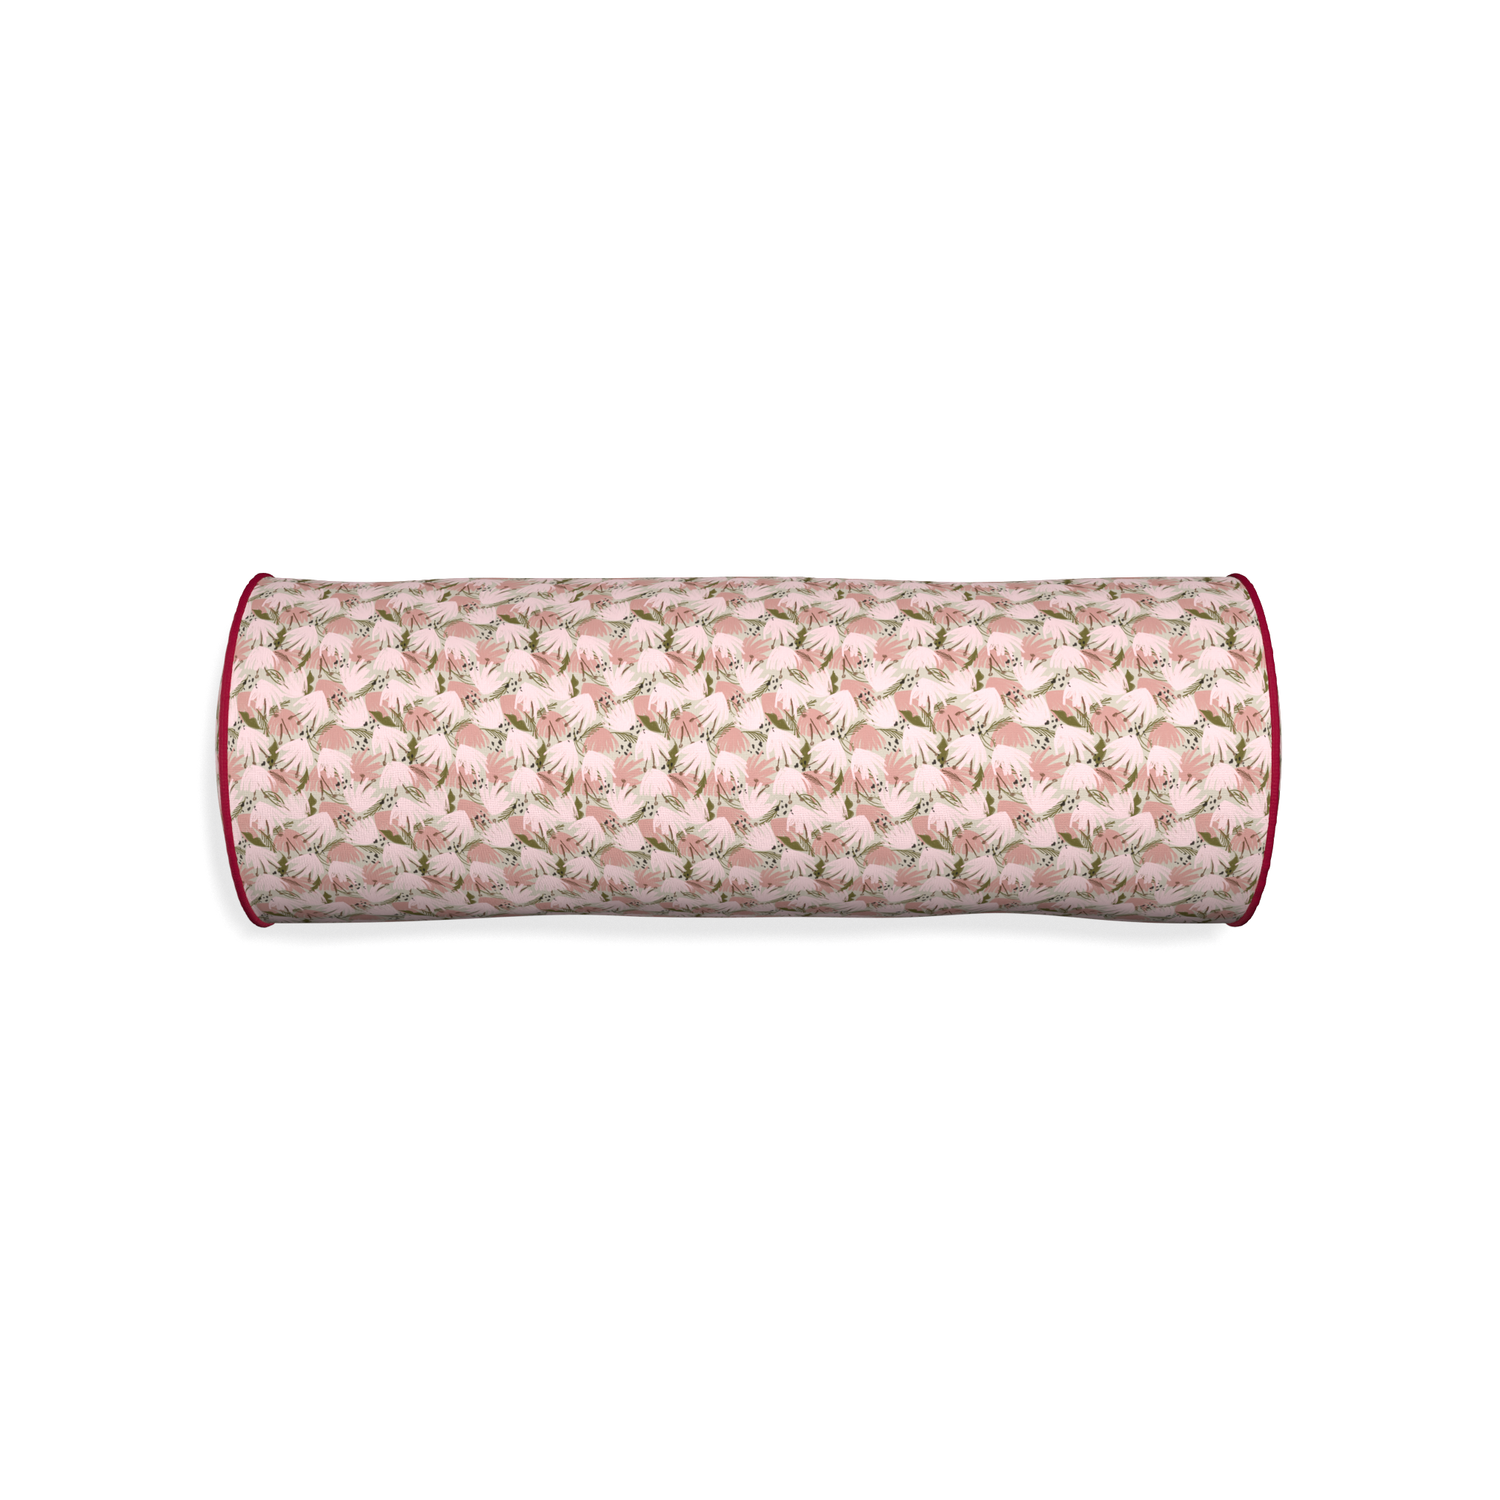 Bolster eden pink custom pink floralpillow with raspberry piping on white background